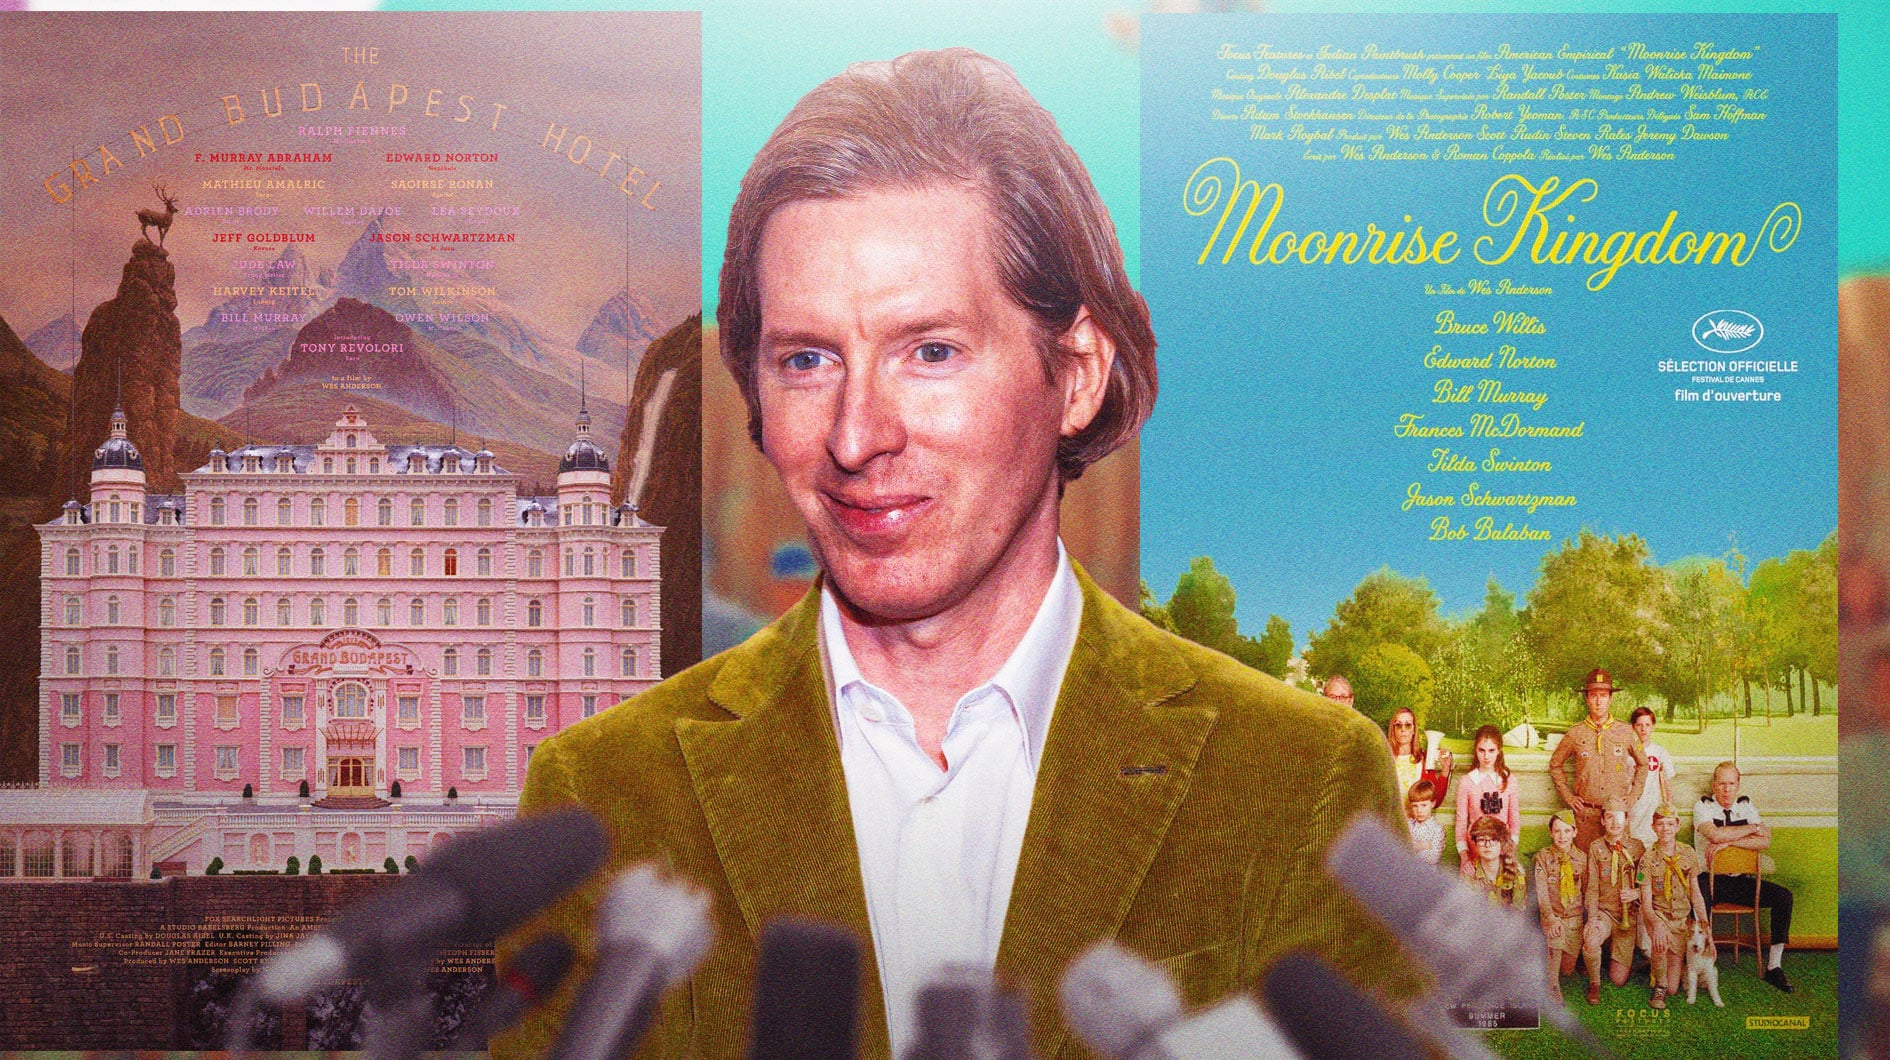 Wes Anderson in front of posters of The Grand Budapest Hotel and Moonrise Kingdom.